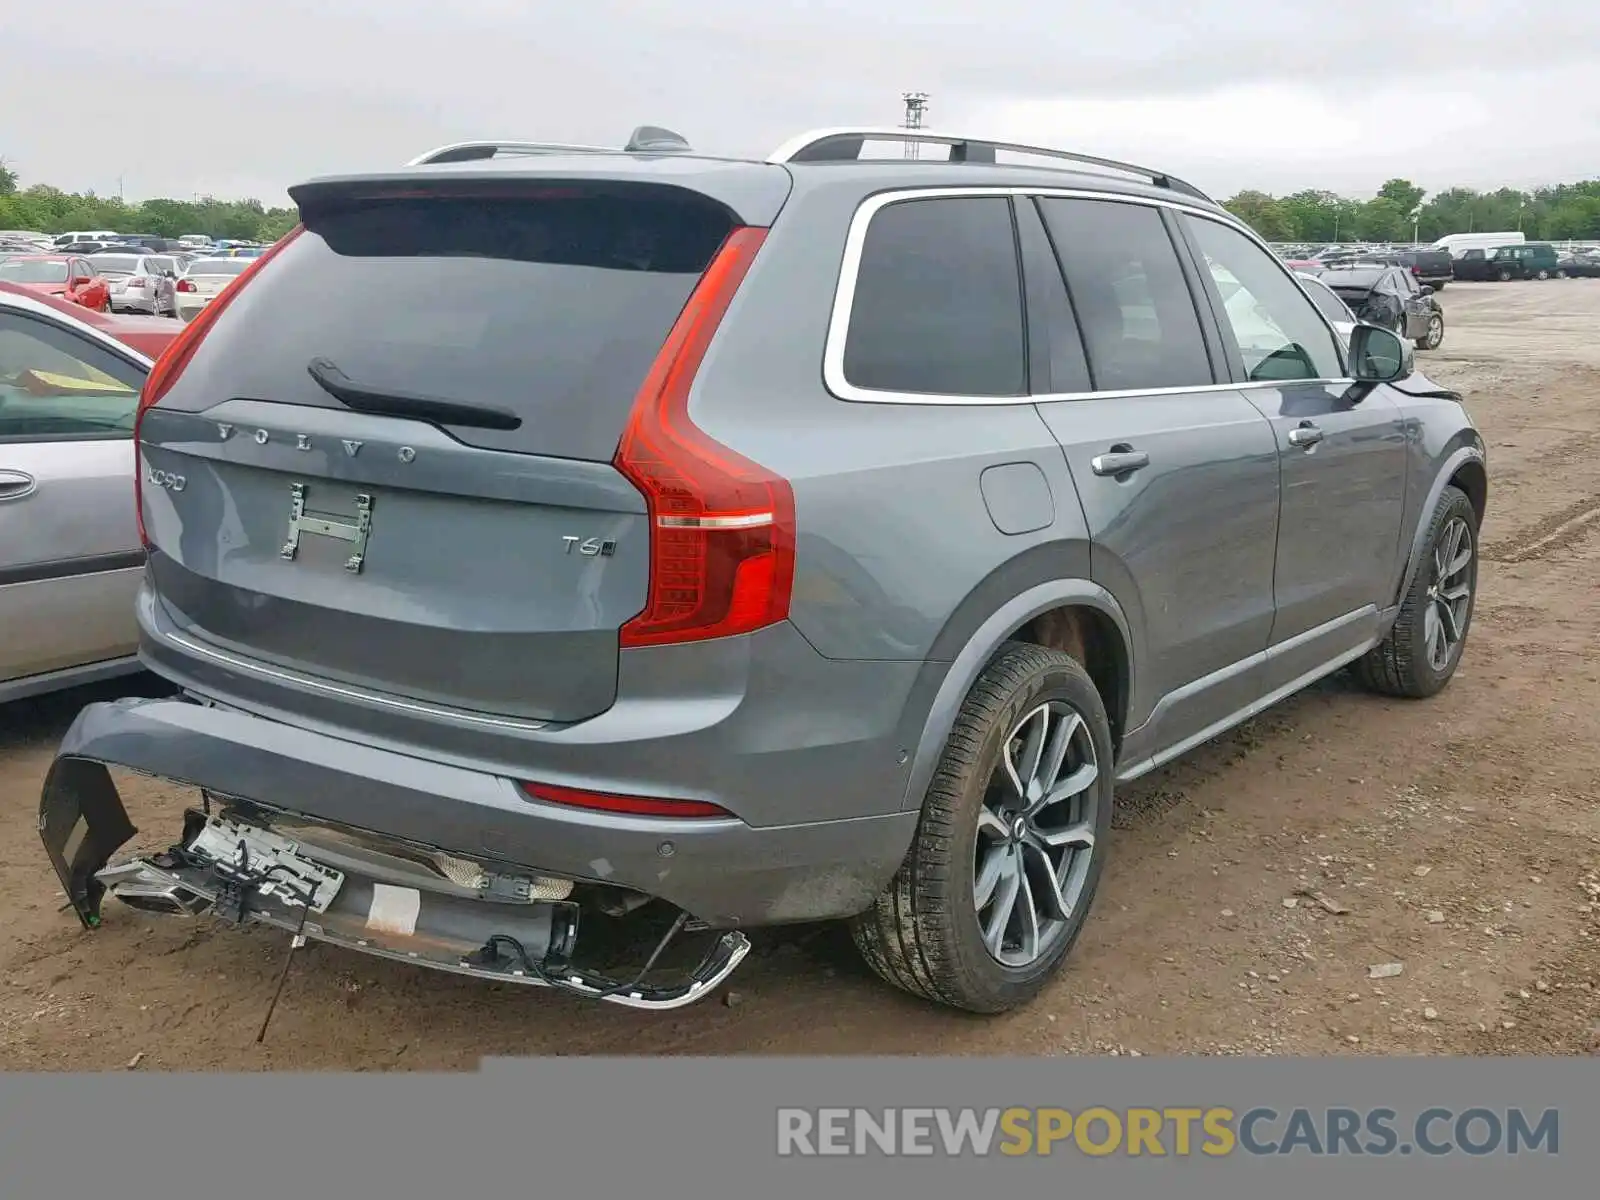 4 Photograph of a damaged car YV4A22PK8K1424604 VOLVO XC90 T6 2019